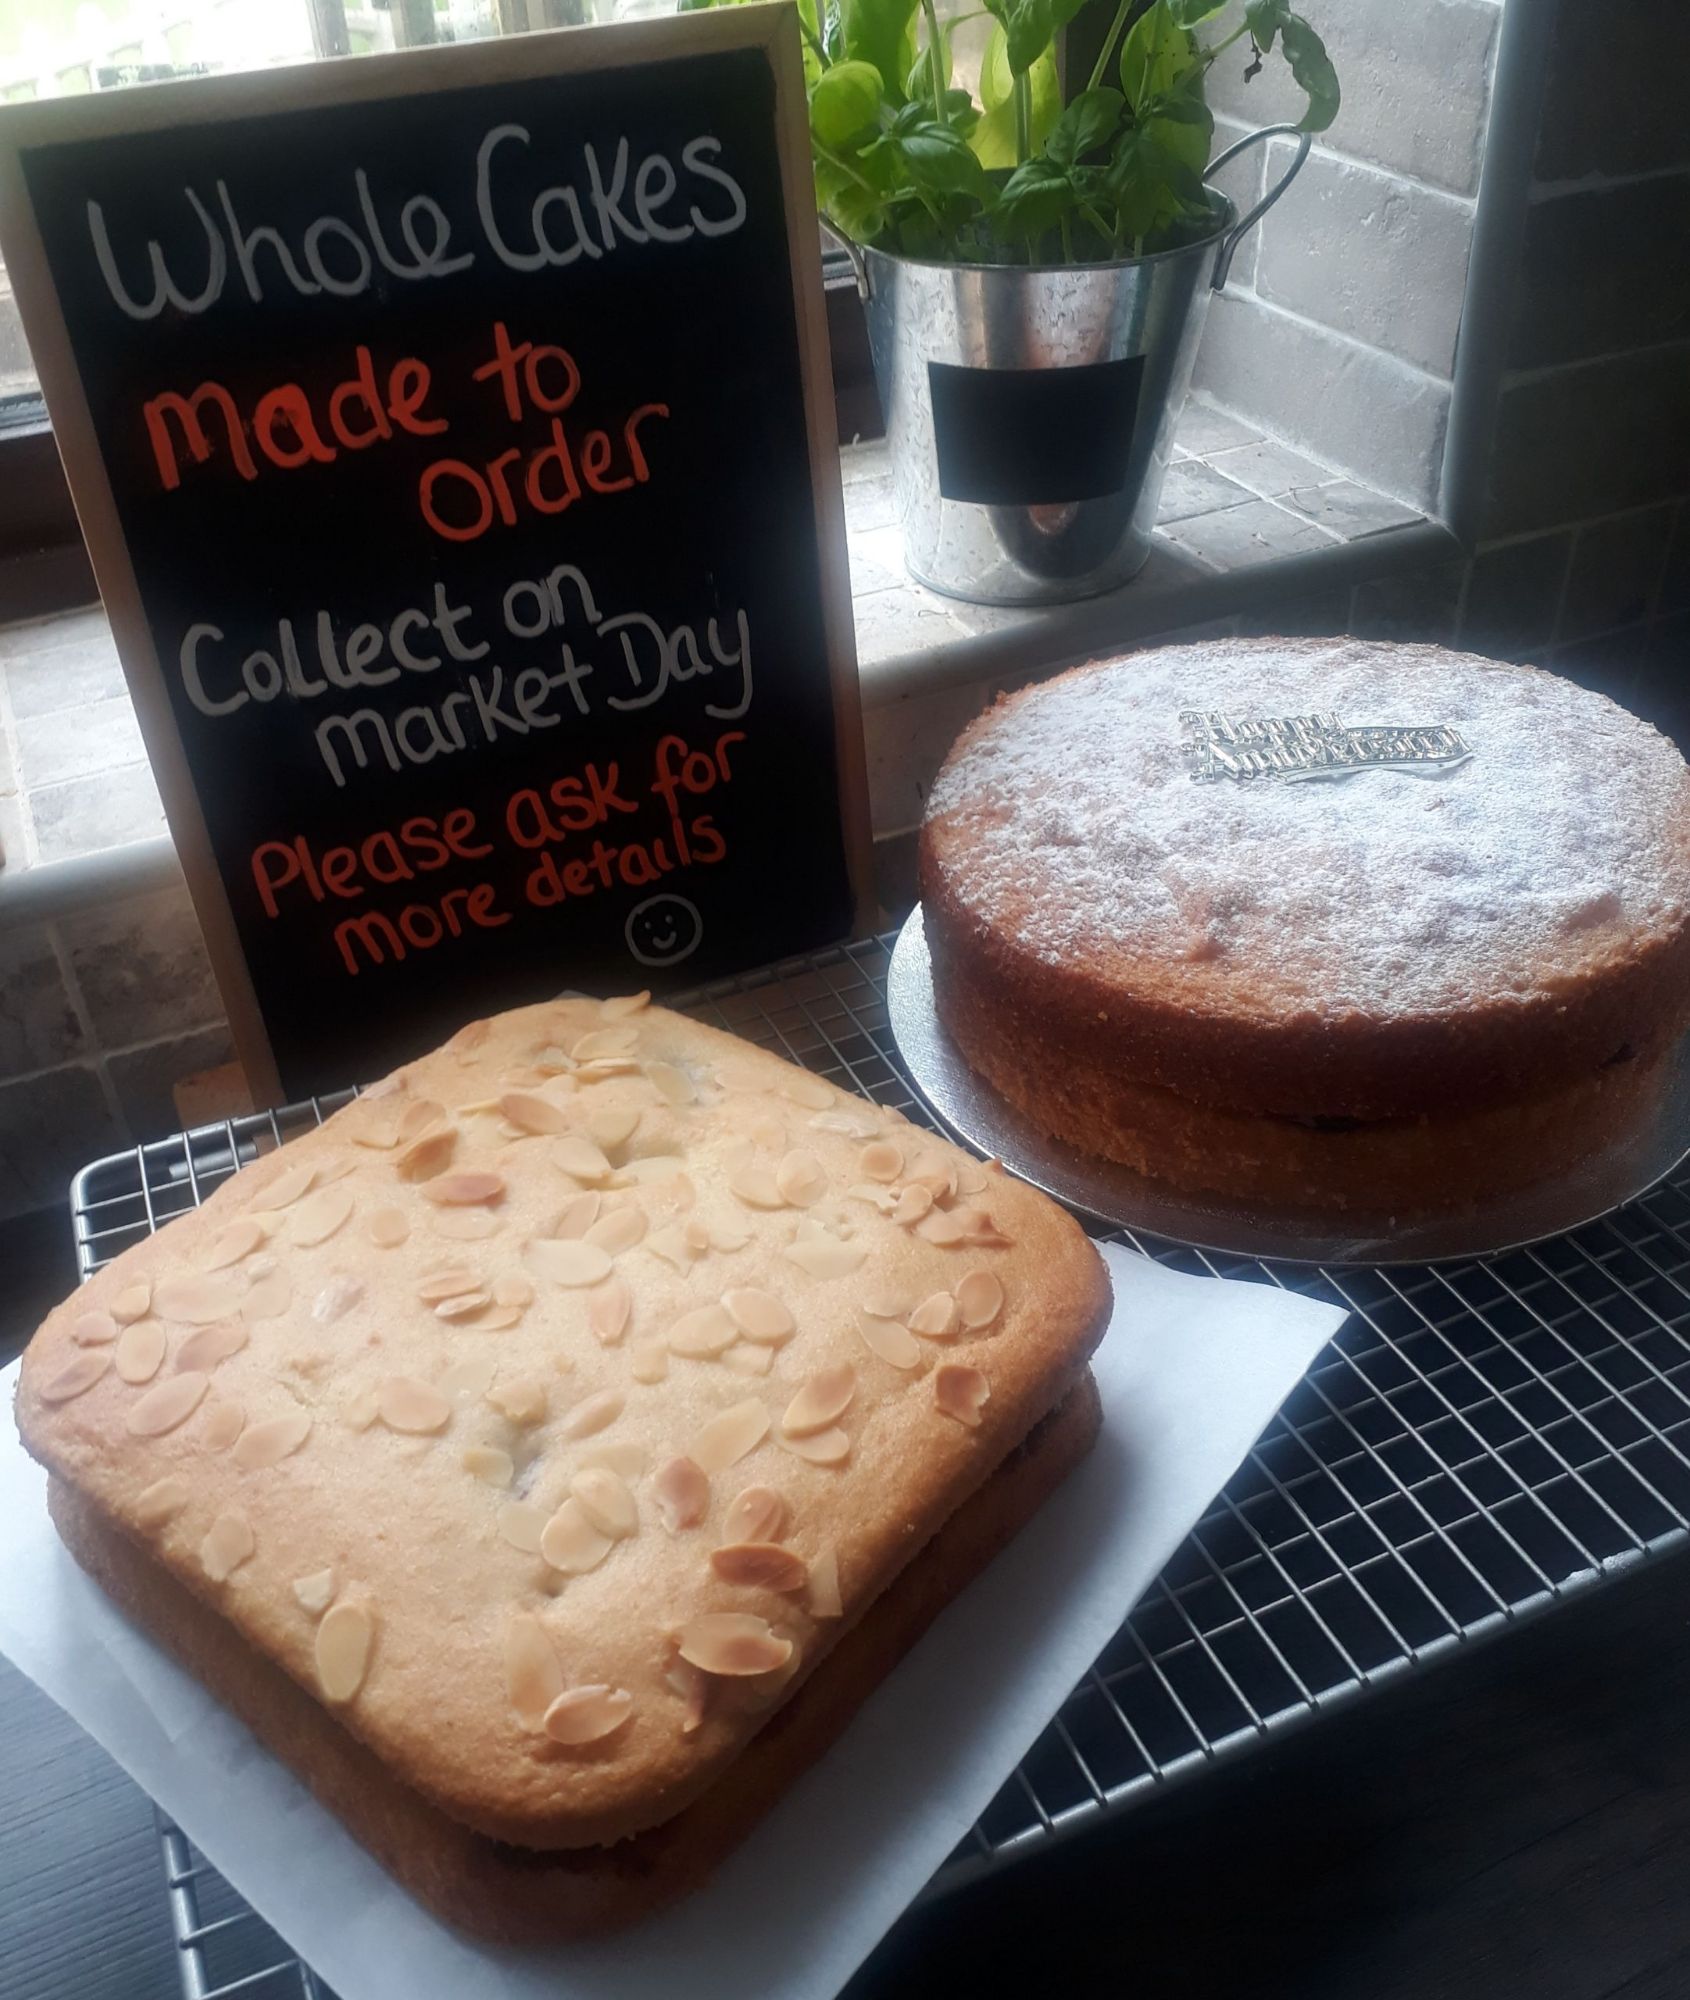 Whole Cakes baked to Order